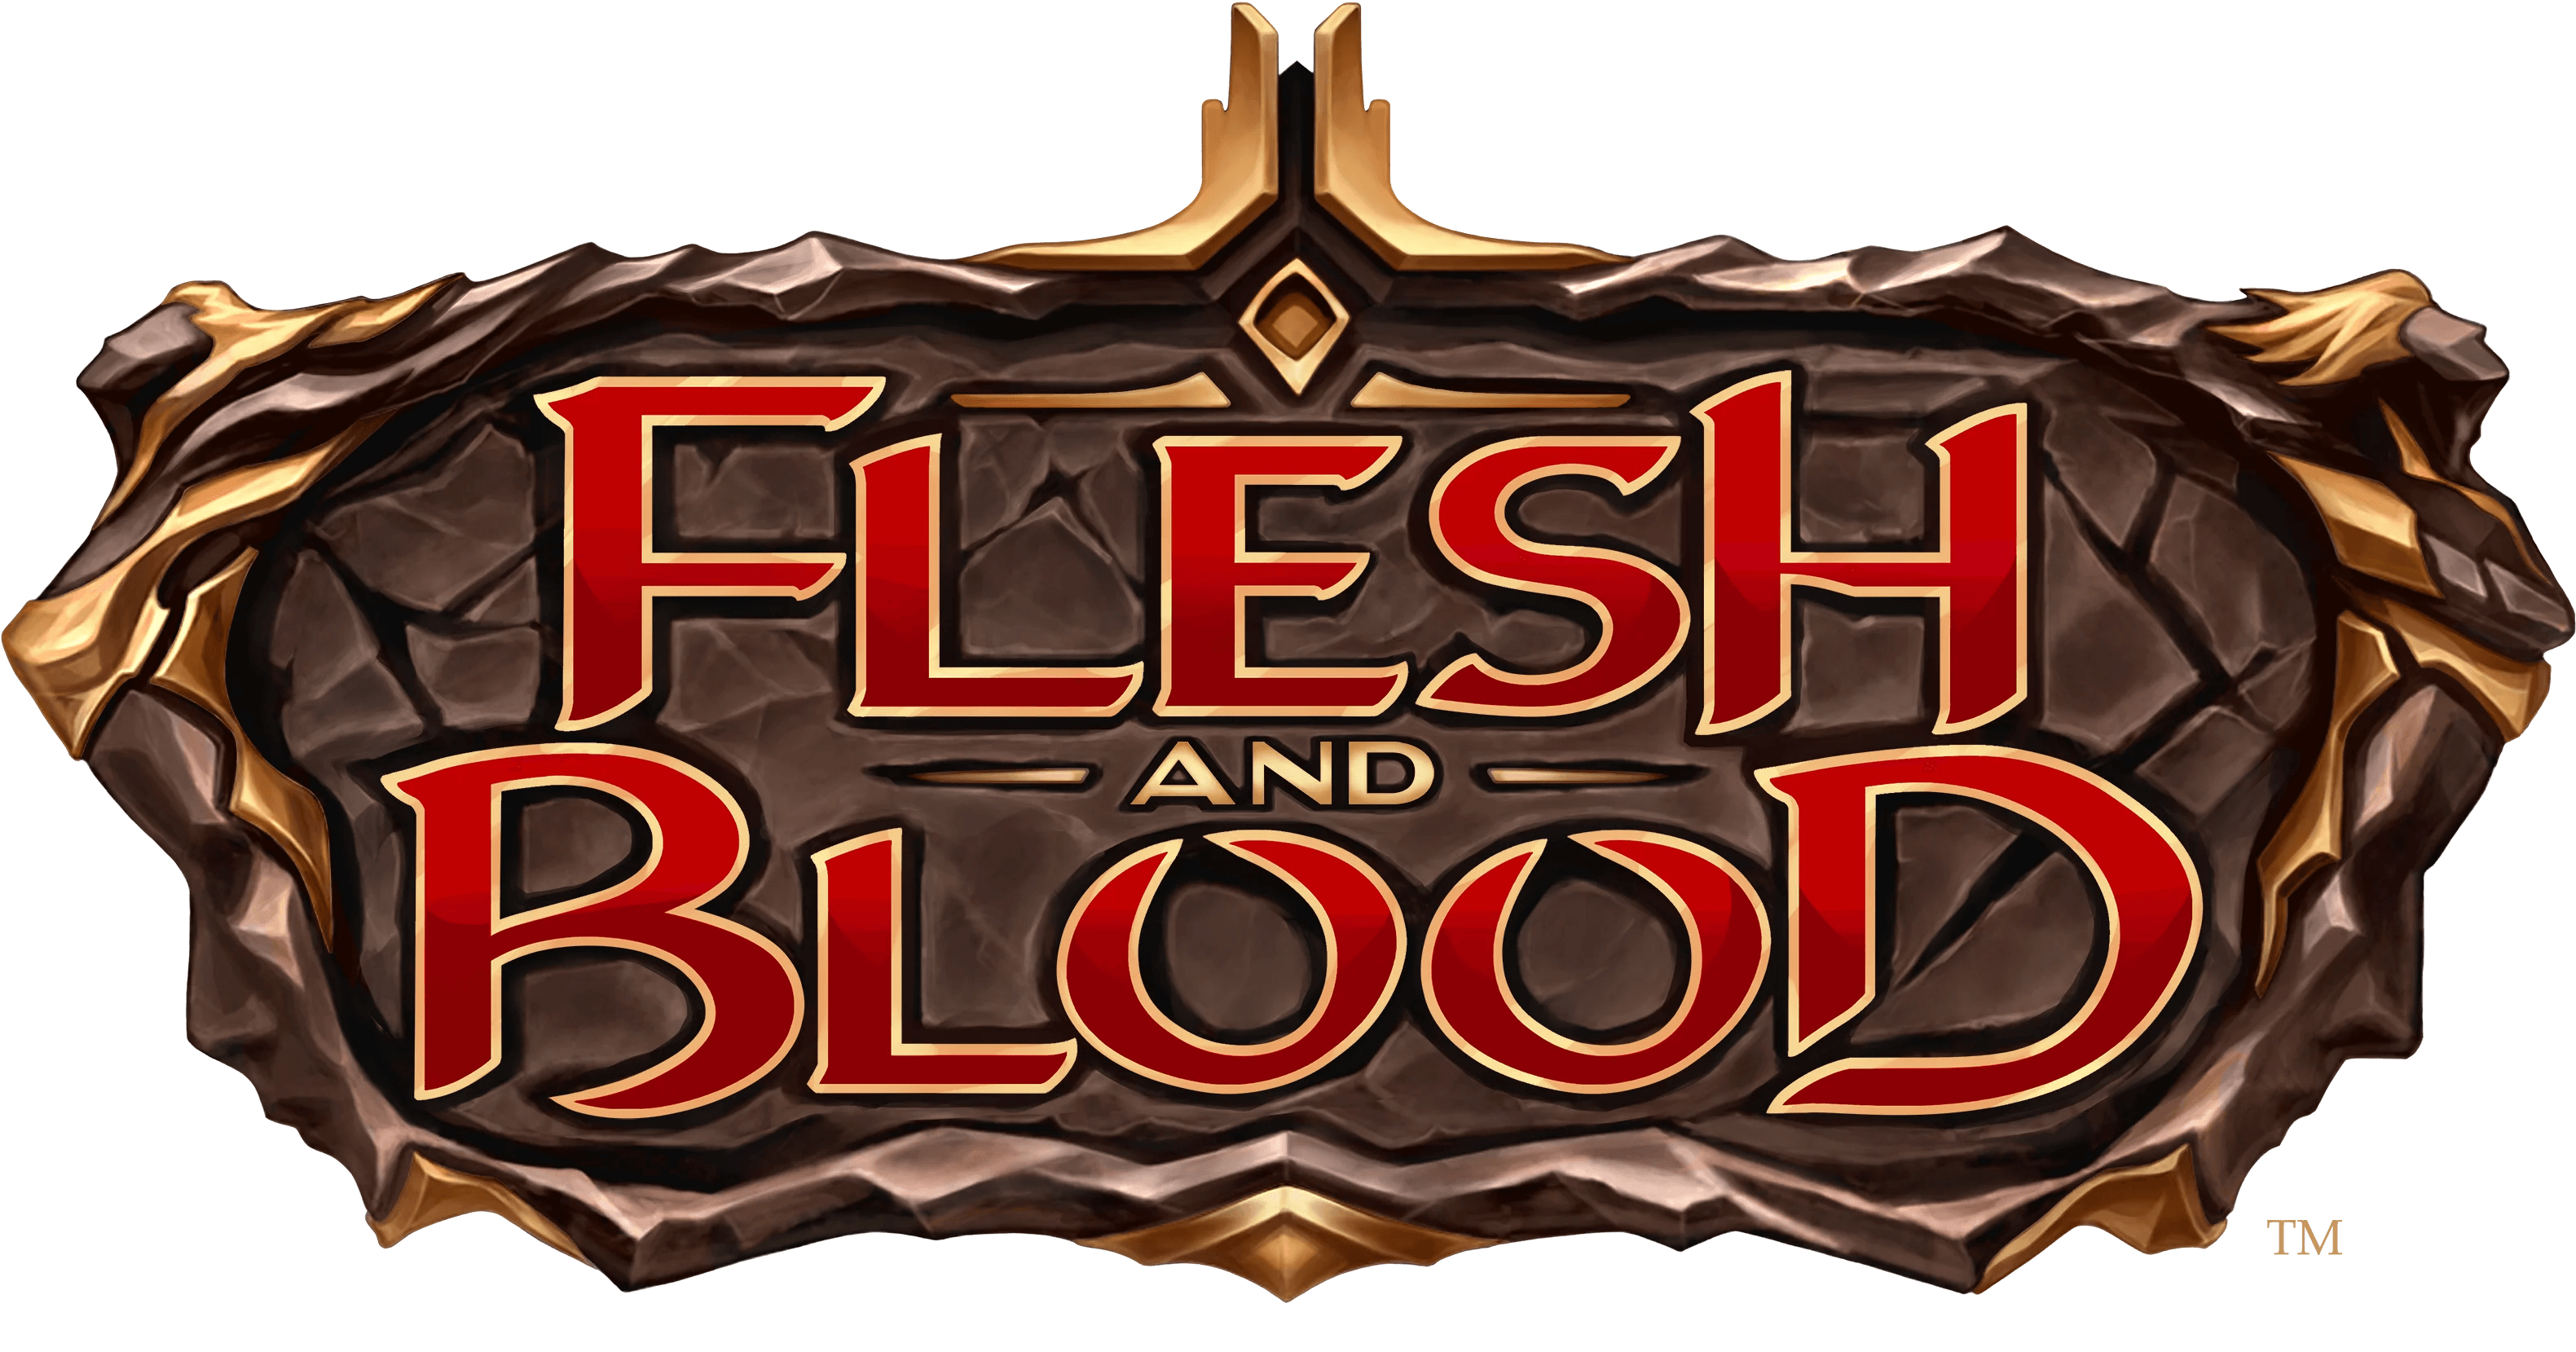 Flesh And Blood - Everfest - 1st Edition - Booster Box (24 Packs) - Hobby Champion Inc